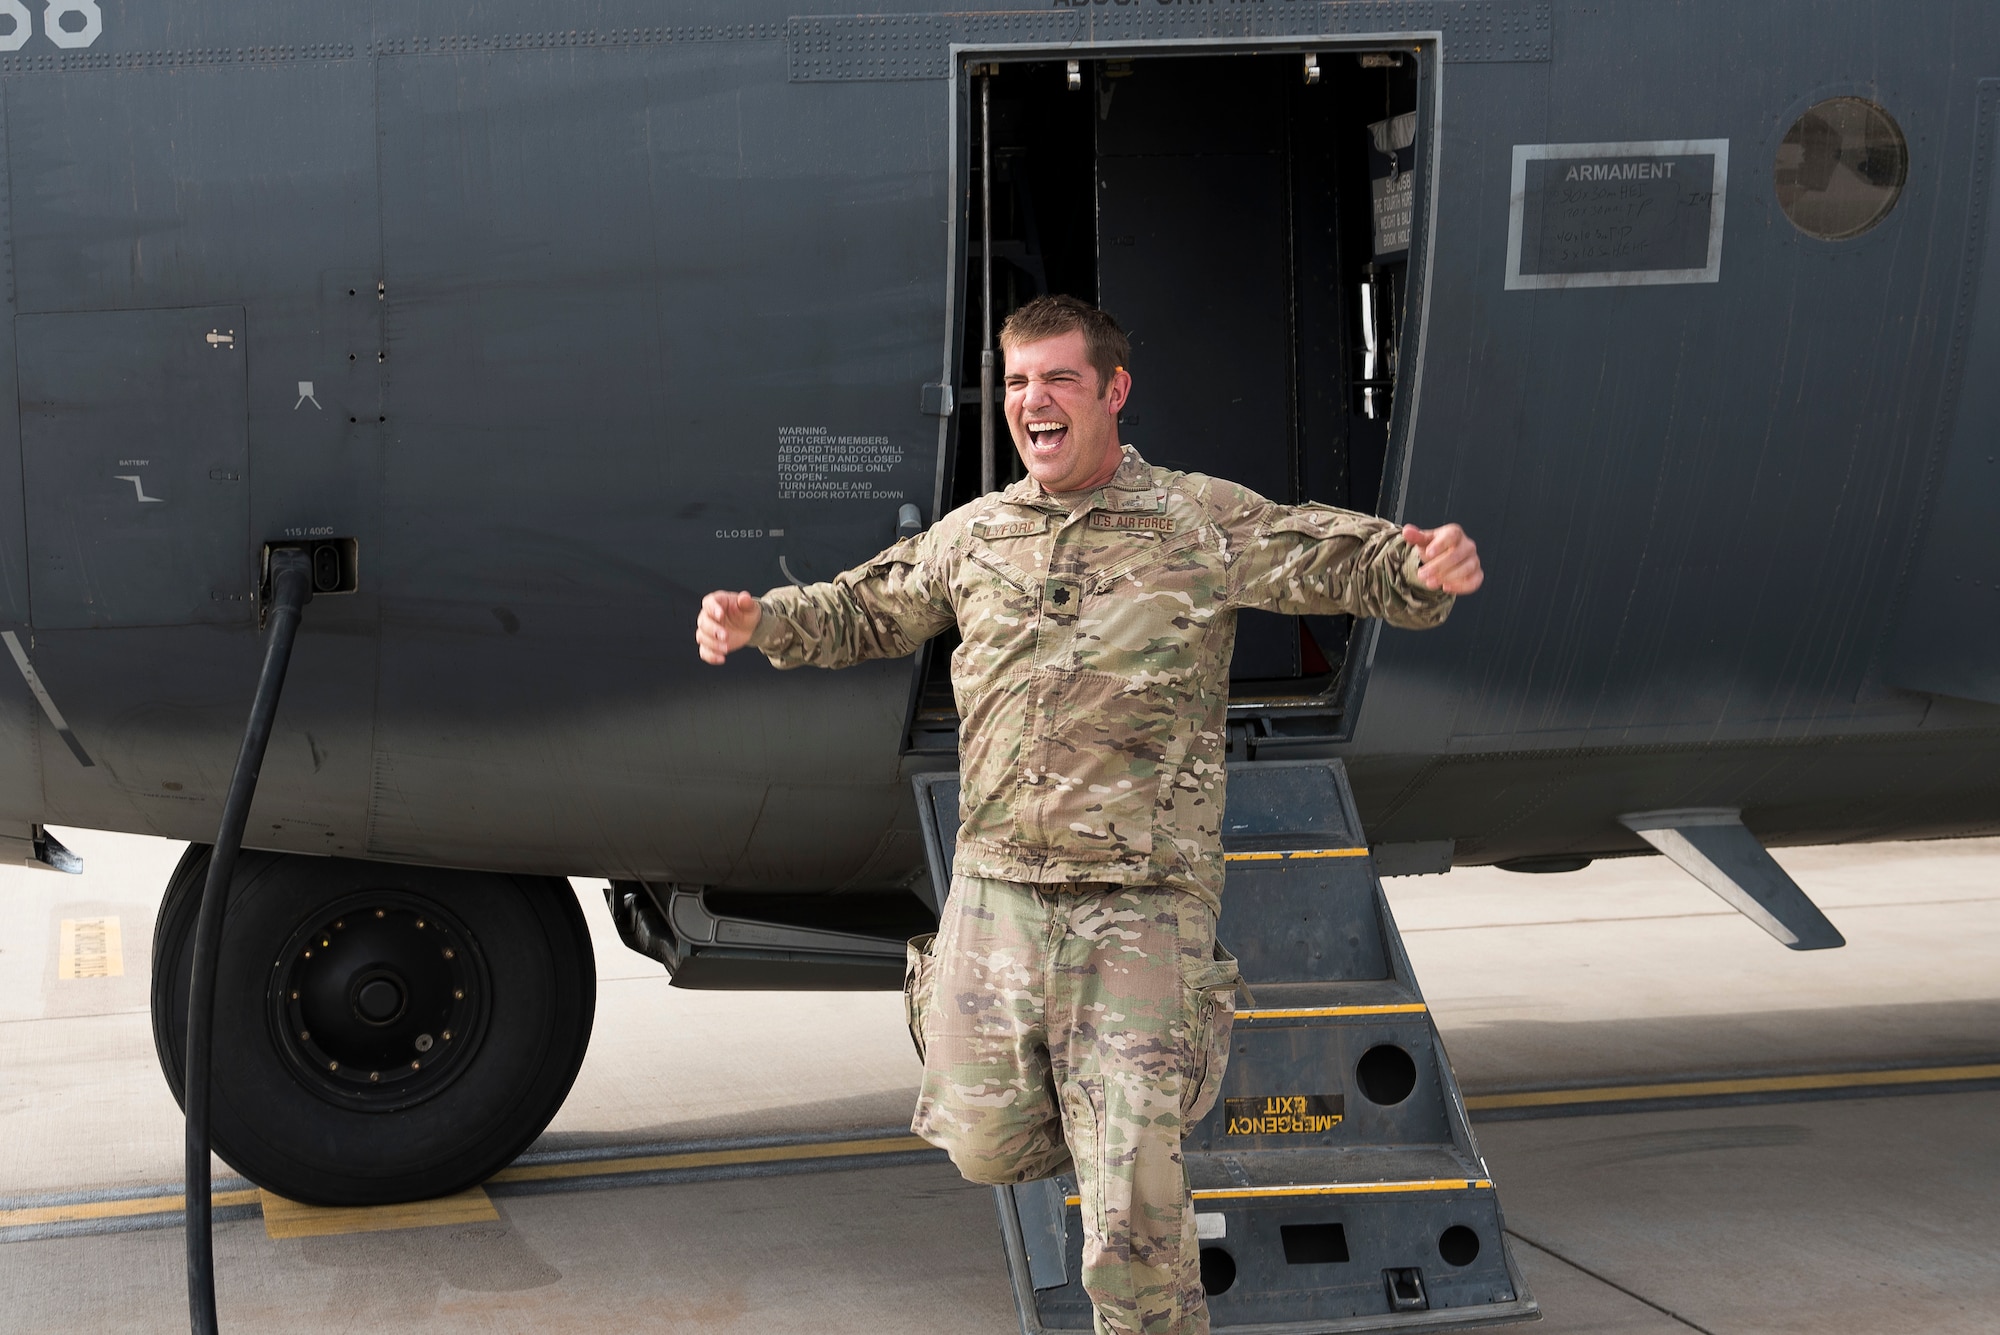 Lt. Col. John Lyford, 551st Special Operations director of operations, comes off an AC-130W aircraft after a fini flight at Cannon Air Force Base, N.M., April 29, 2021. After the 551 SOS stands down, the intent is to move gunship training to Hurlburt Field, Florida, and potentially Kirtland Air Force Base, N.M. (U.S. Air Force photo by Senior Airman Vernon R. Walter III)